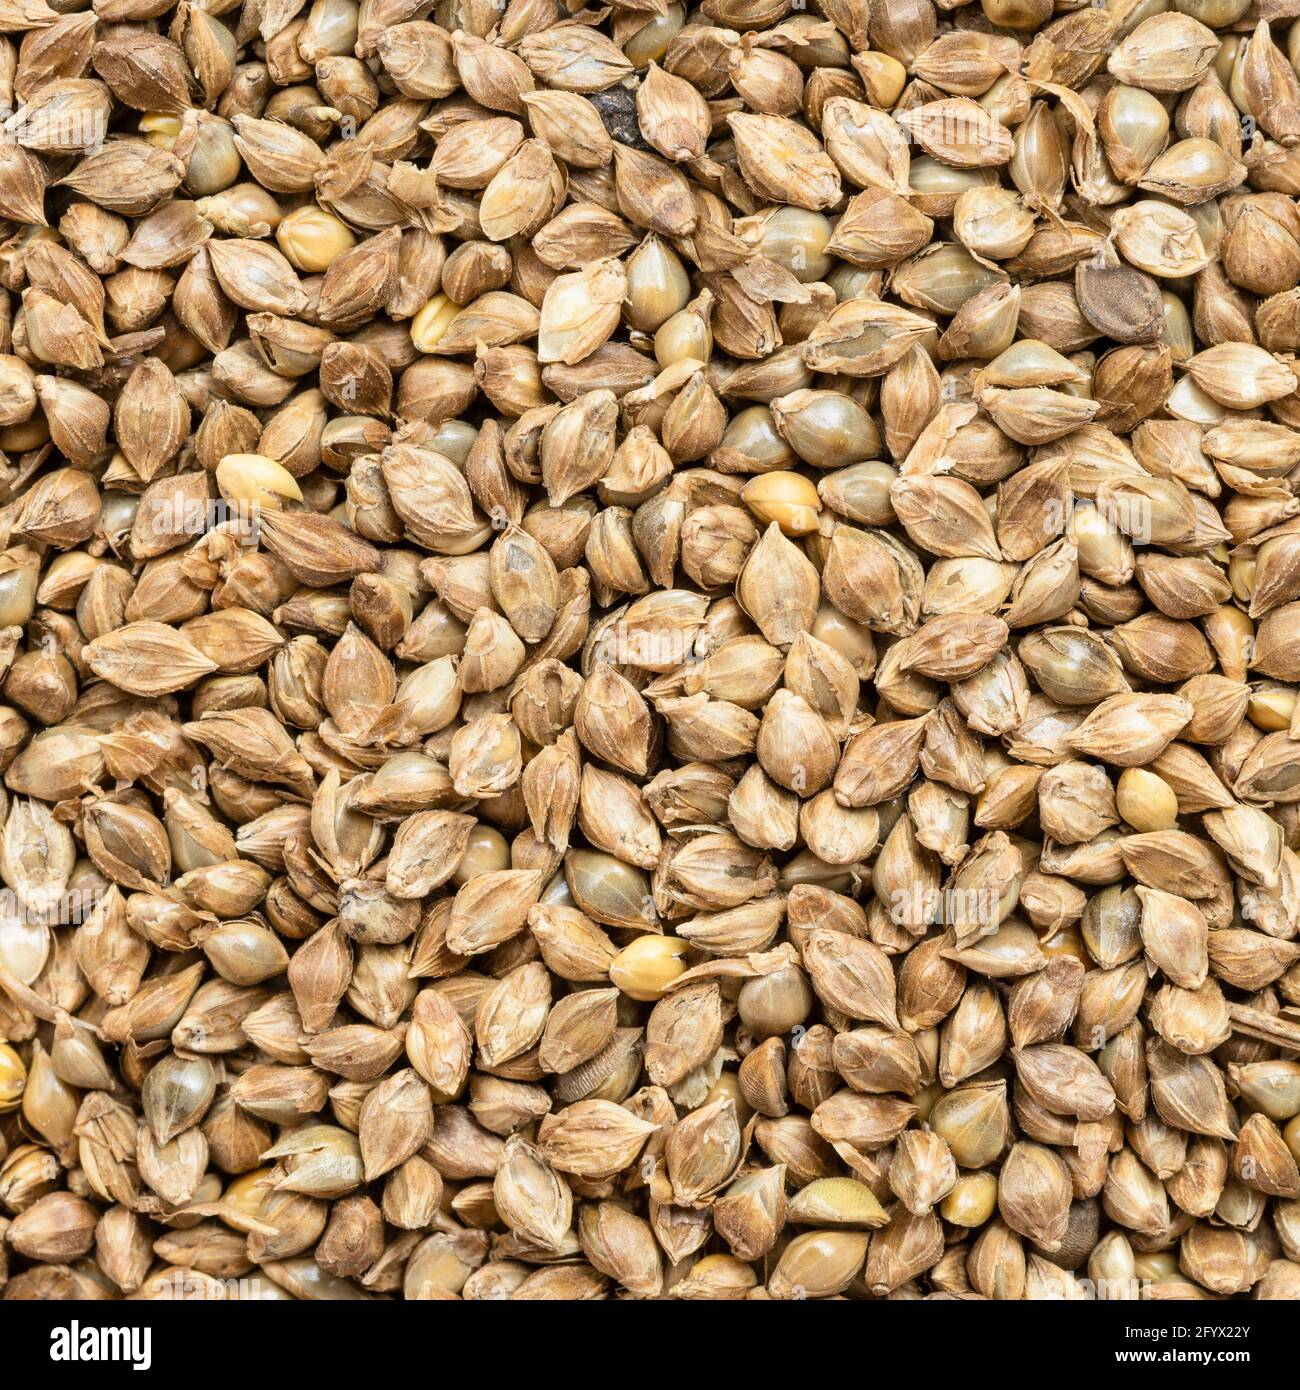 square food background - whole-grain barnyard millet seeds close up Stock Photo